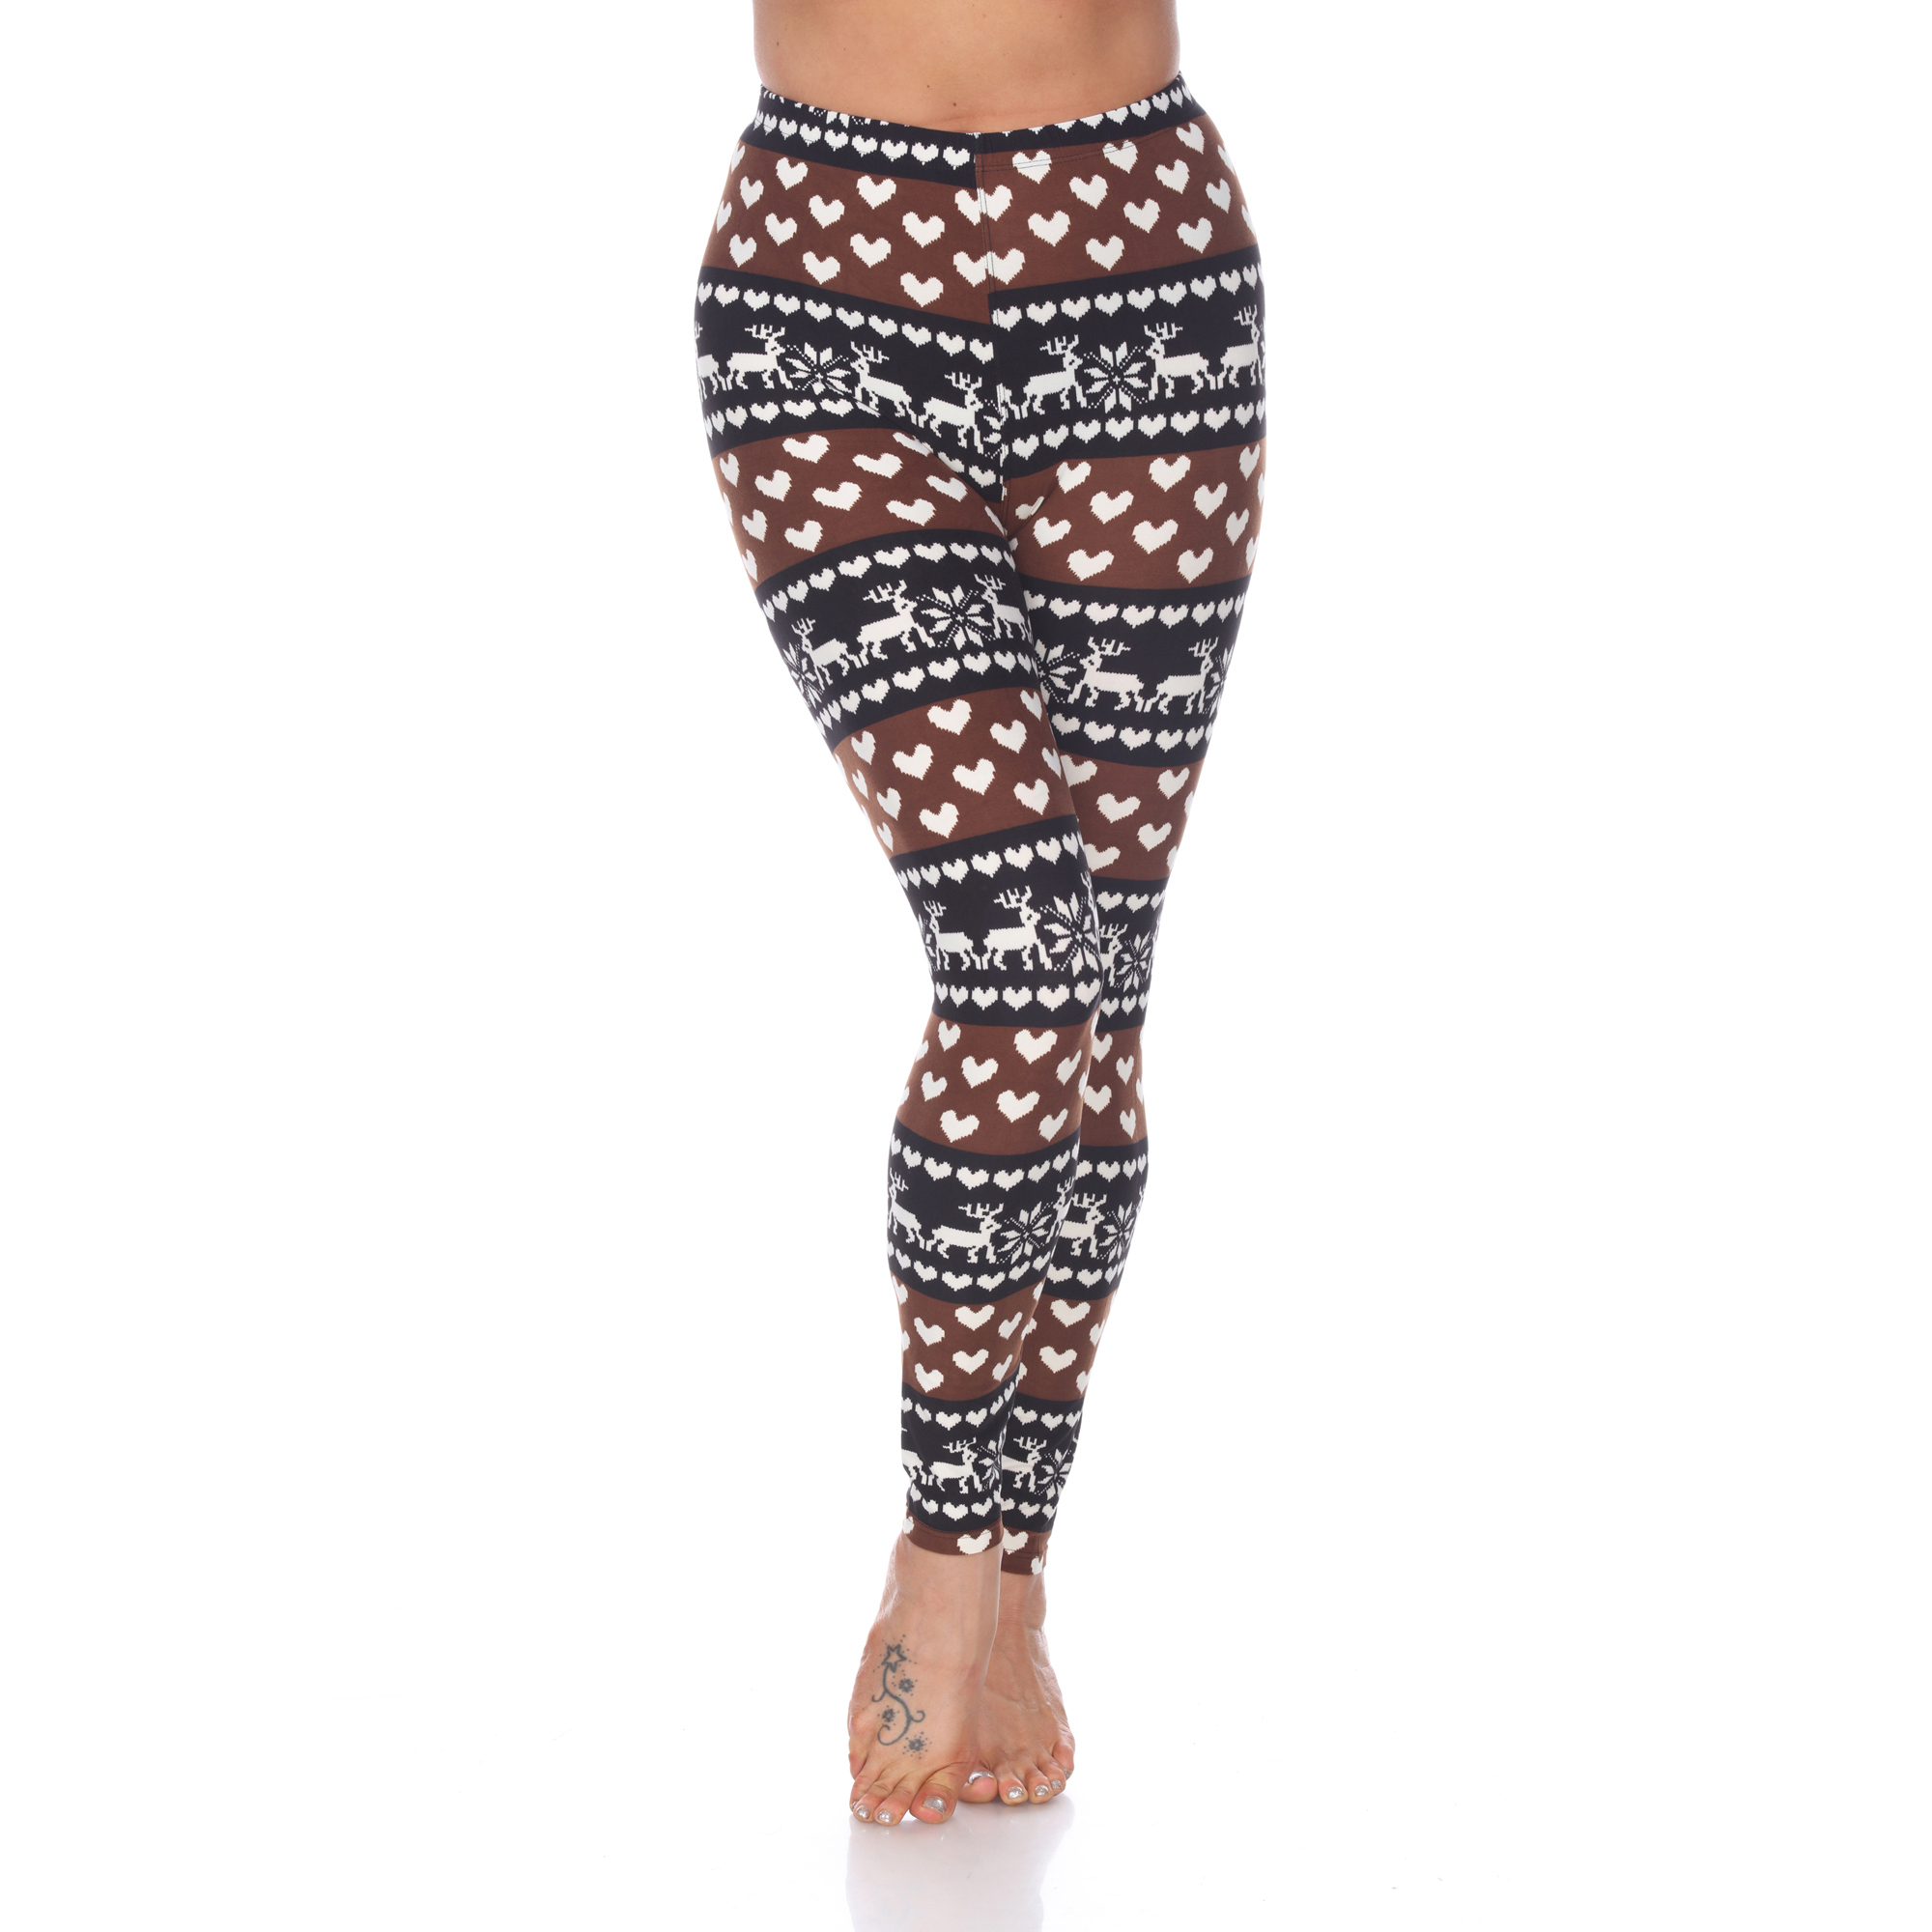 White Mark Women's Holiday Print Stretch Leggings - Brown/White, One Size